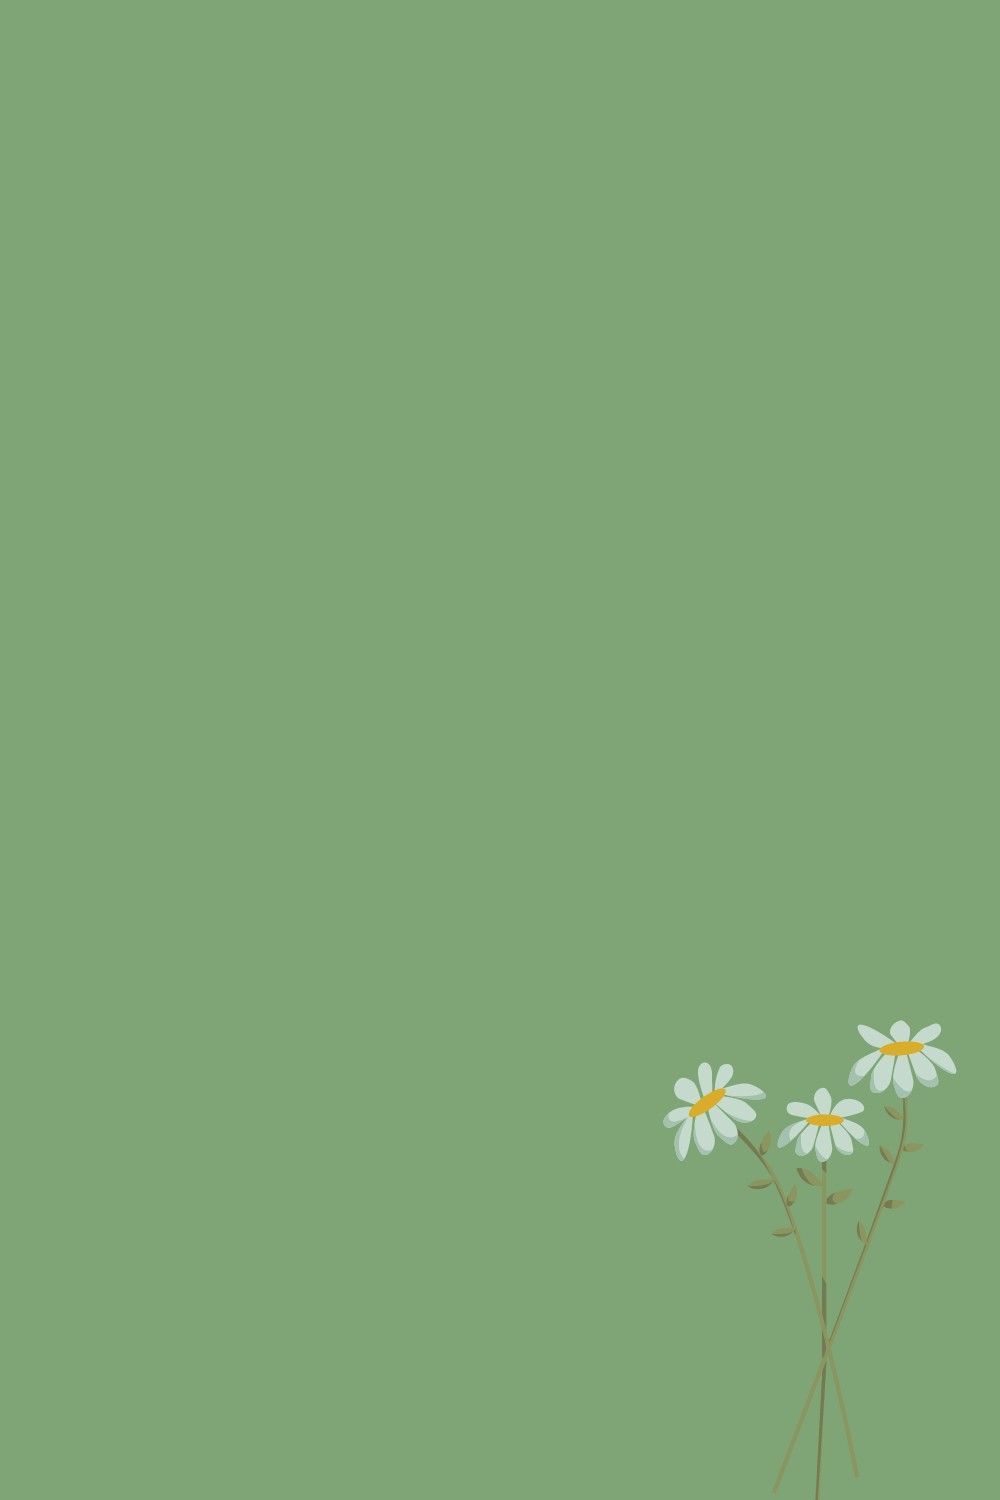 IPhone wallpaper with three daisies on the bottom right corner - Sage green